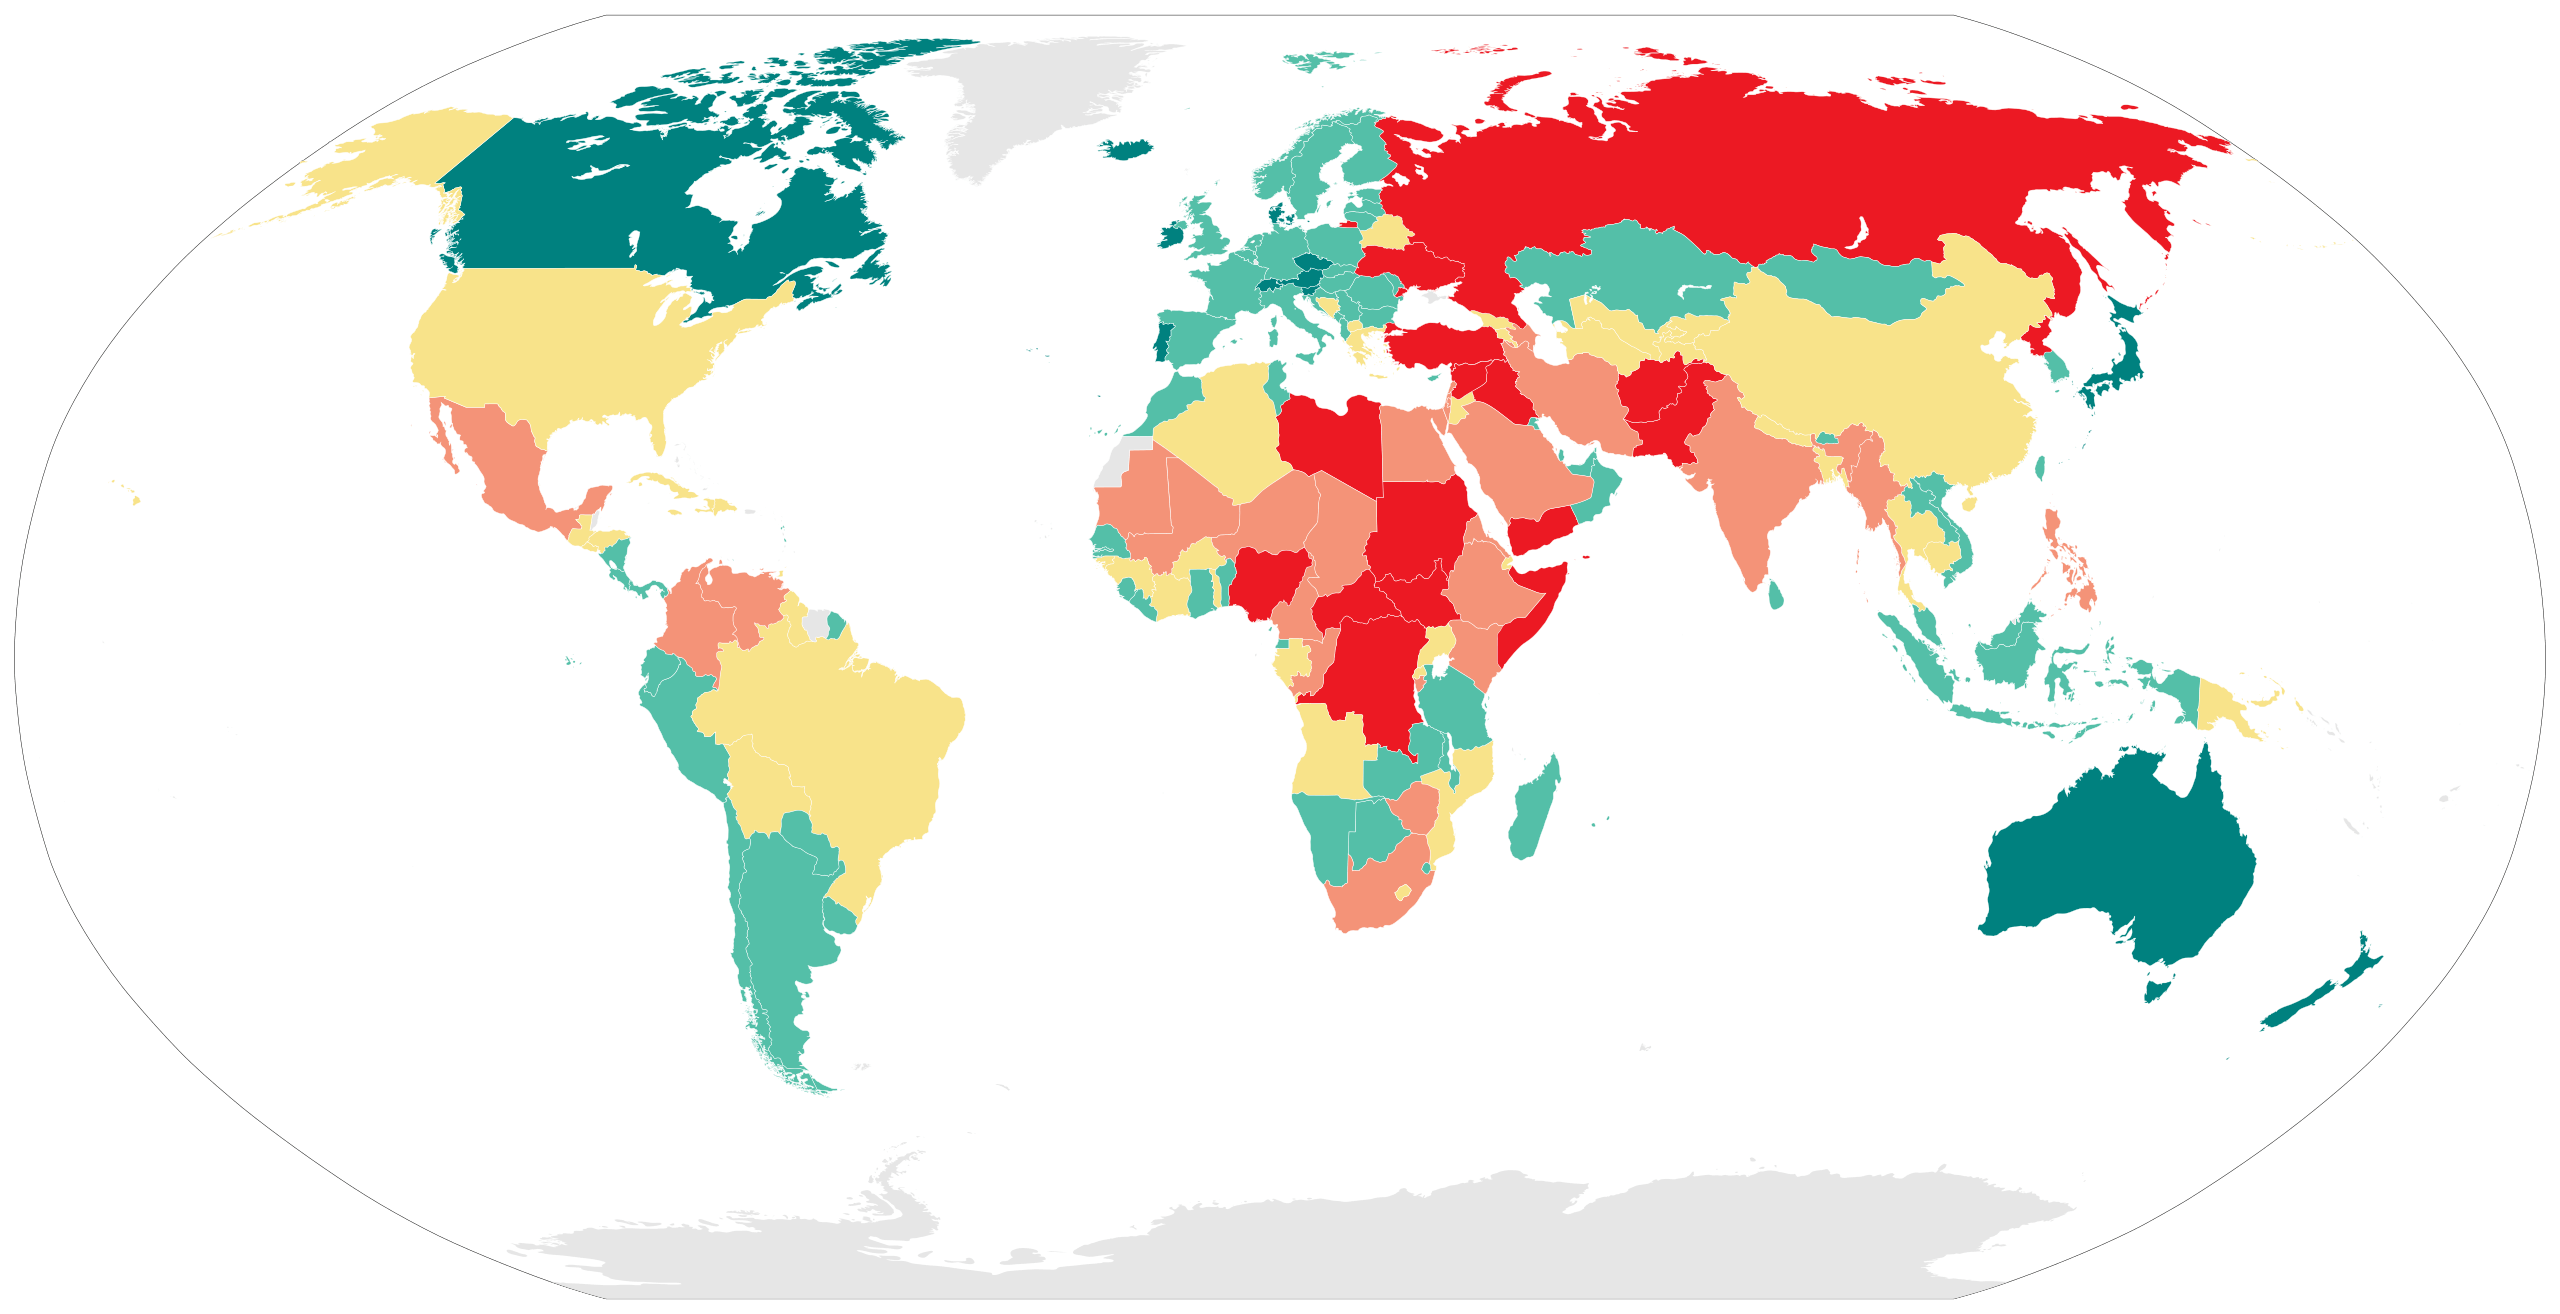 Source: Wikipedia (GLOBAL GPI image from the year 2018)